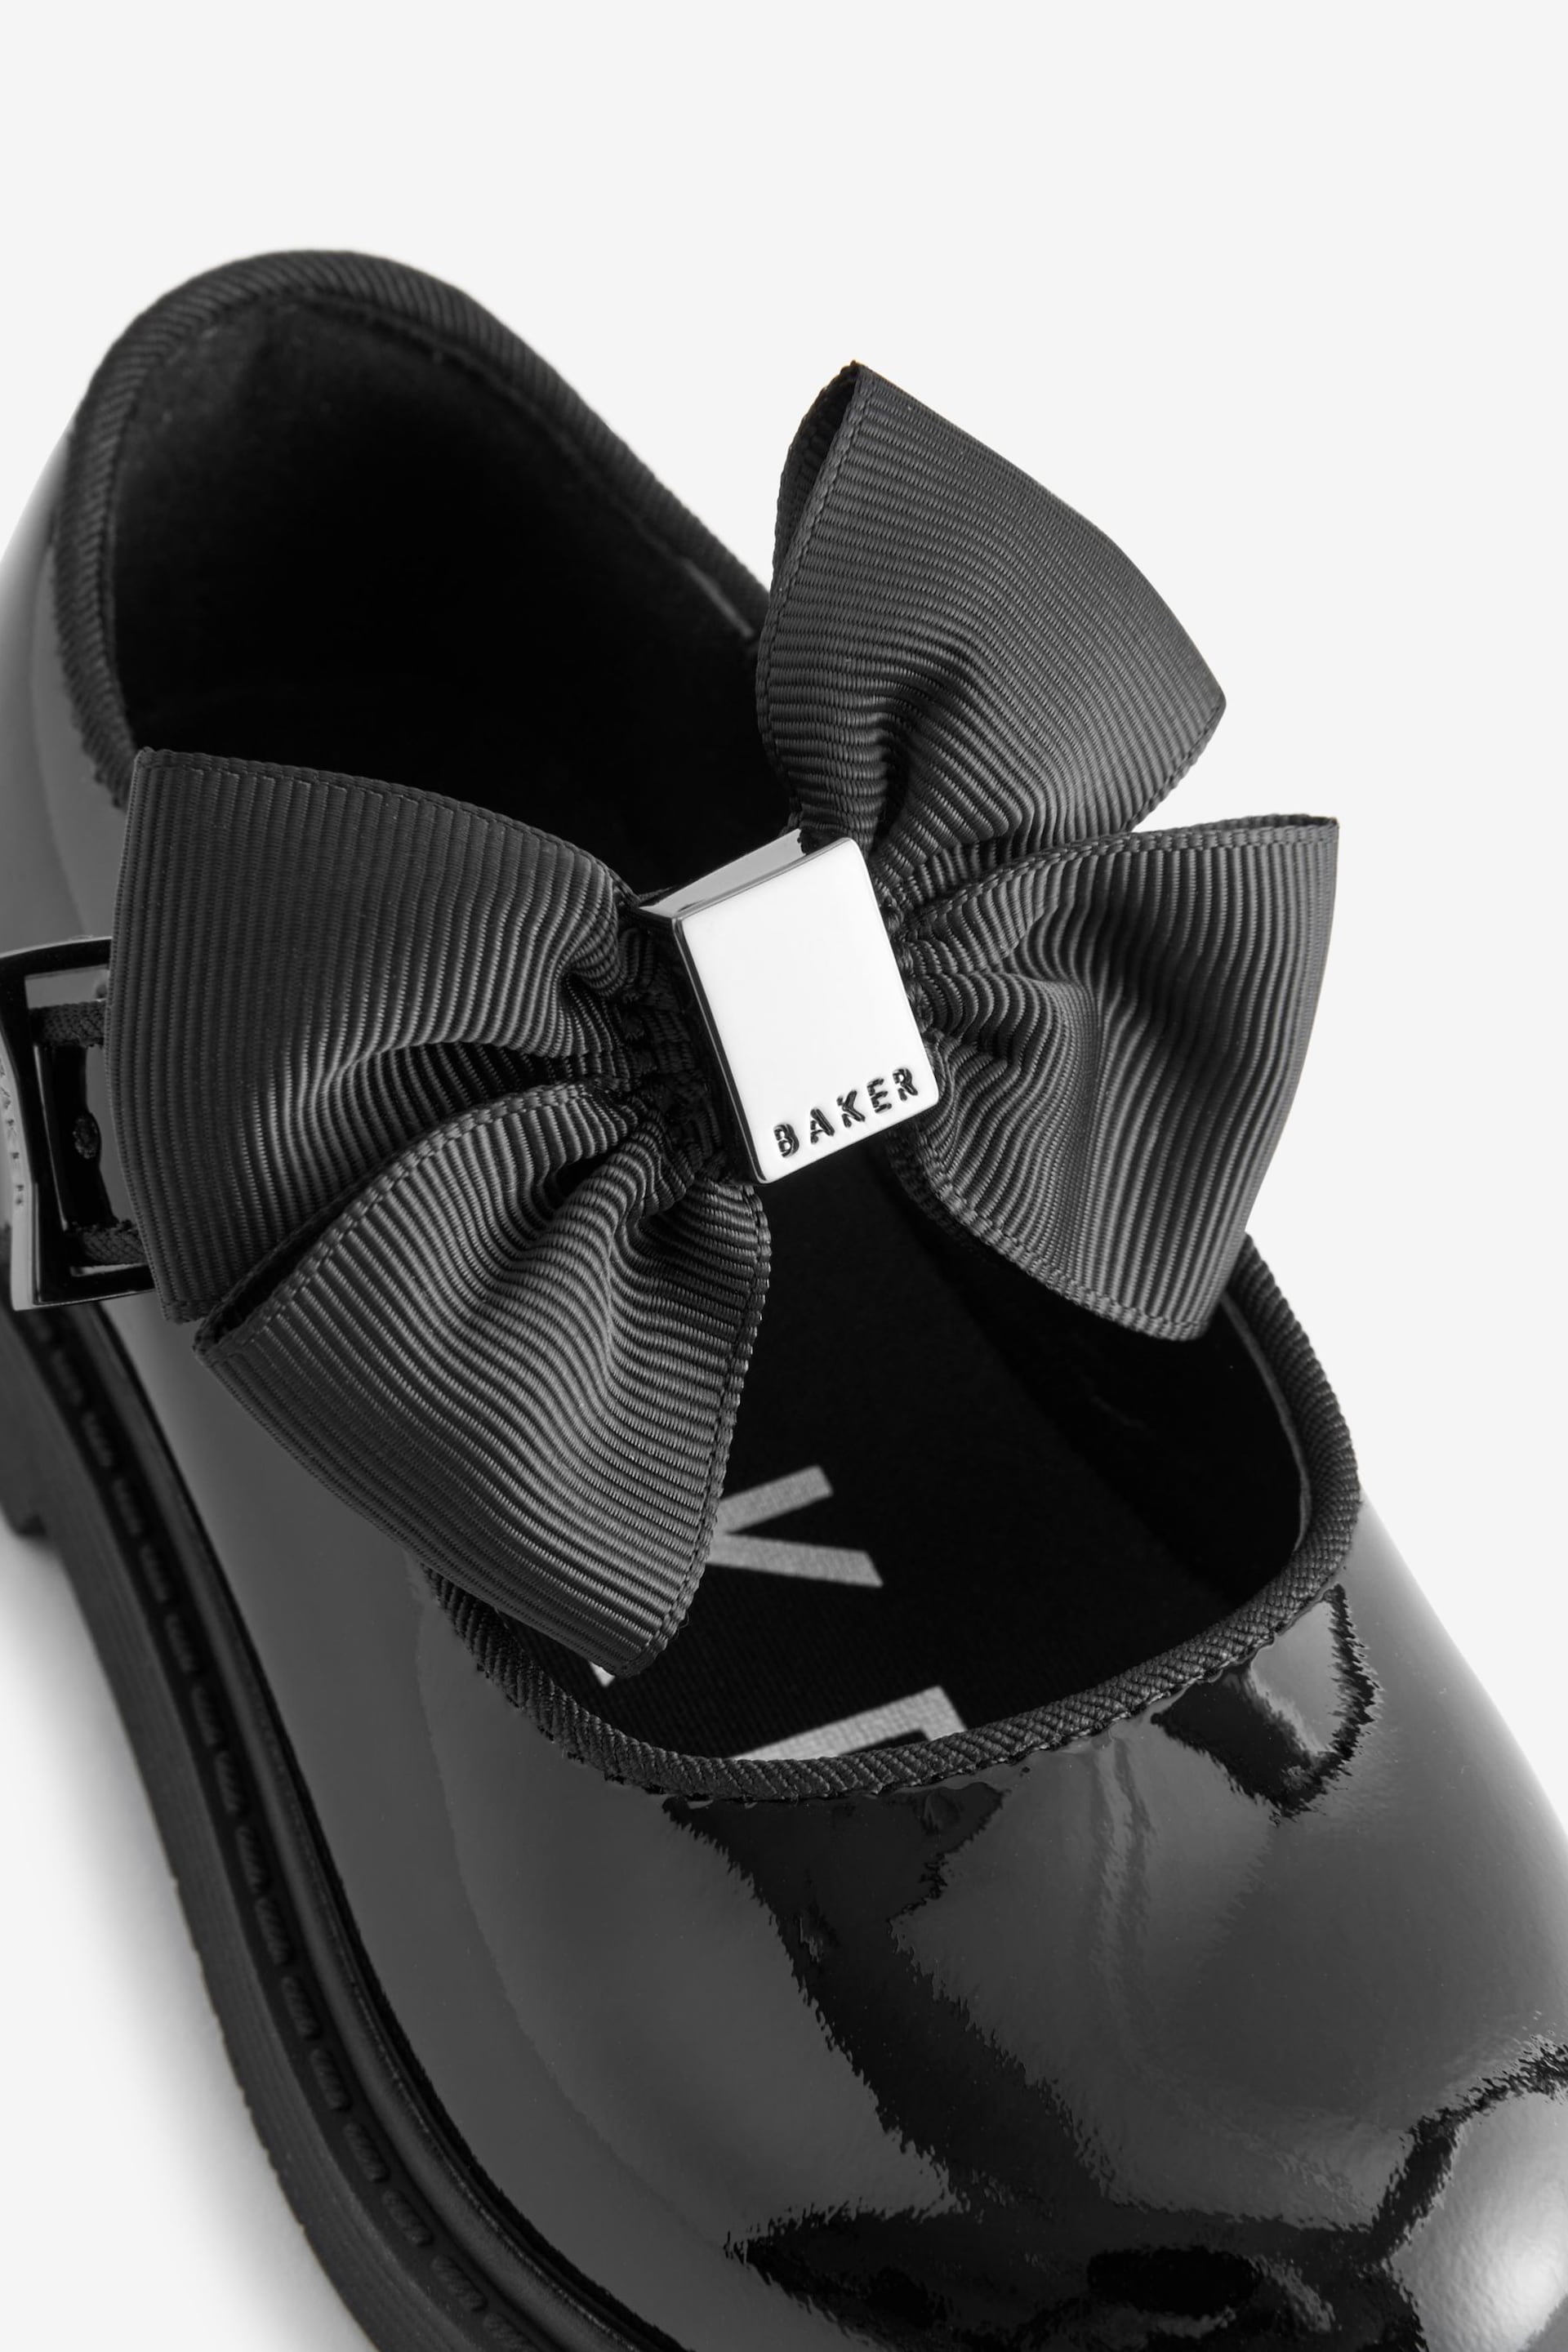 Baker by Ted Baker Girls Back to School Mary Jane Black Shoes with Bow - Image 4 of 6